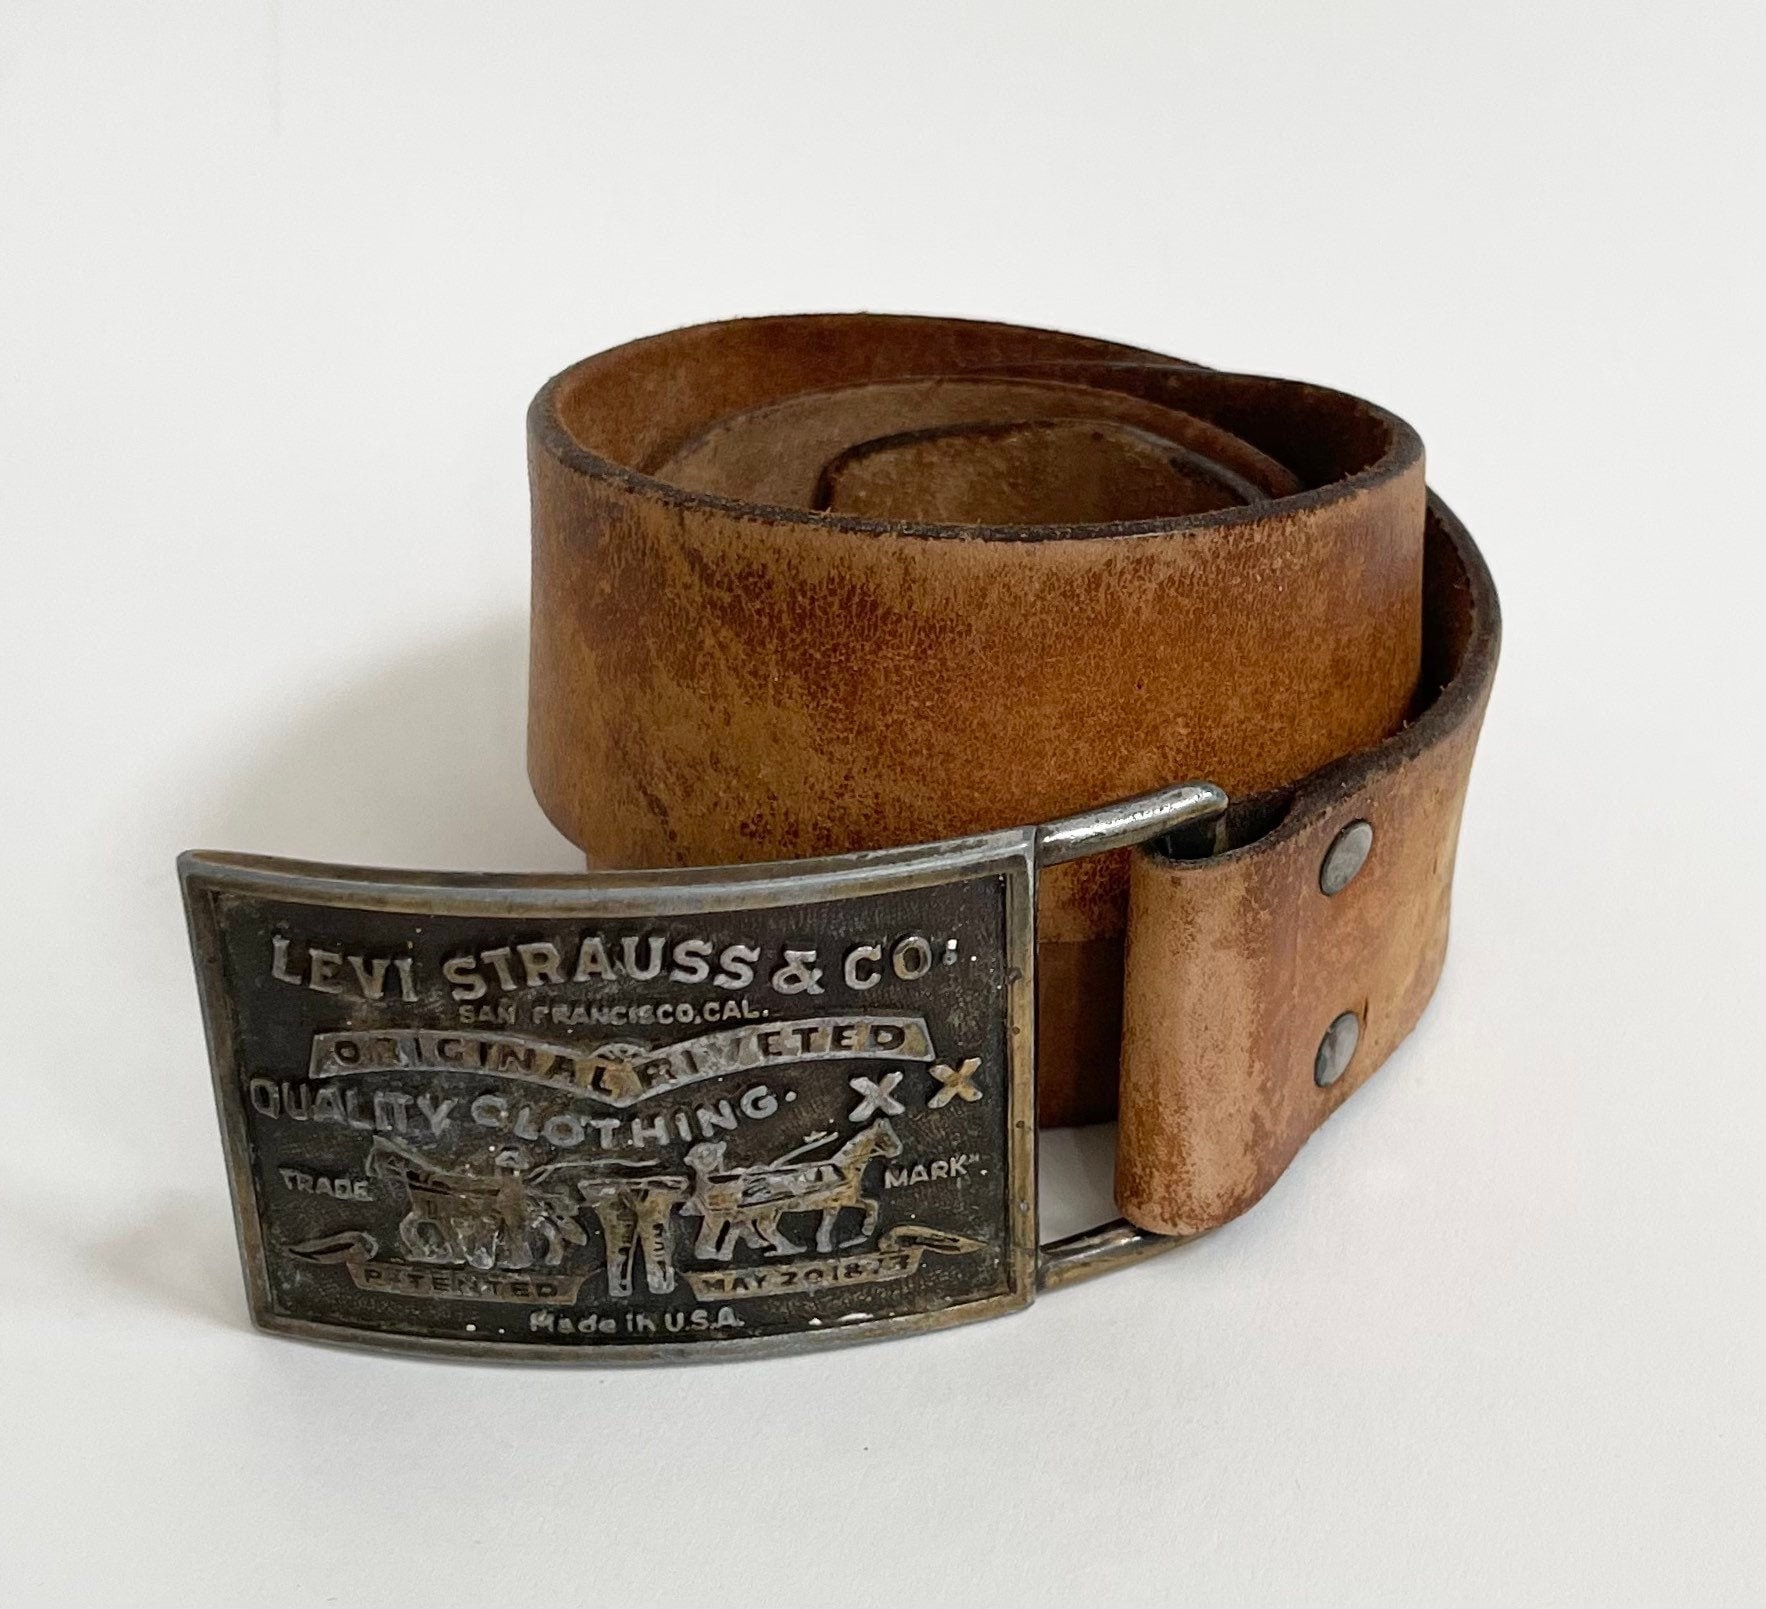 Levi's Belt Buckle Hand Stained Cowhide Leather Strap Vintage Levi Strauss  & Co Made in USA Very Distressed Brown Leather Size 36